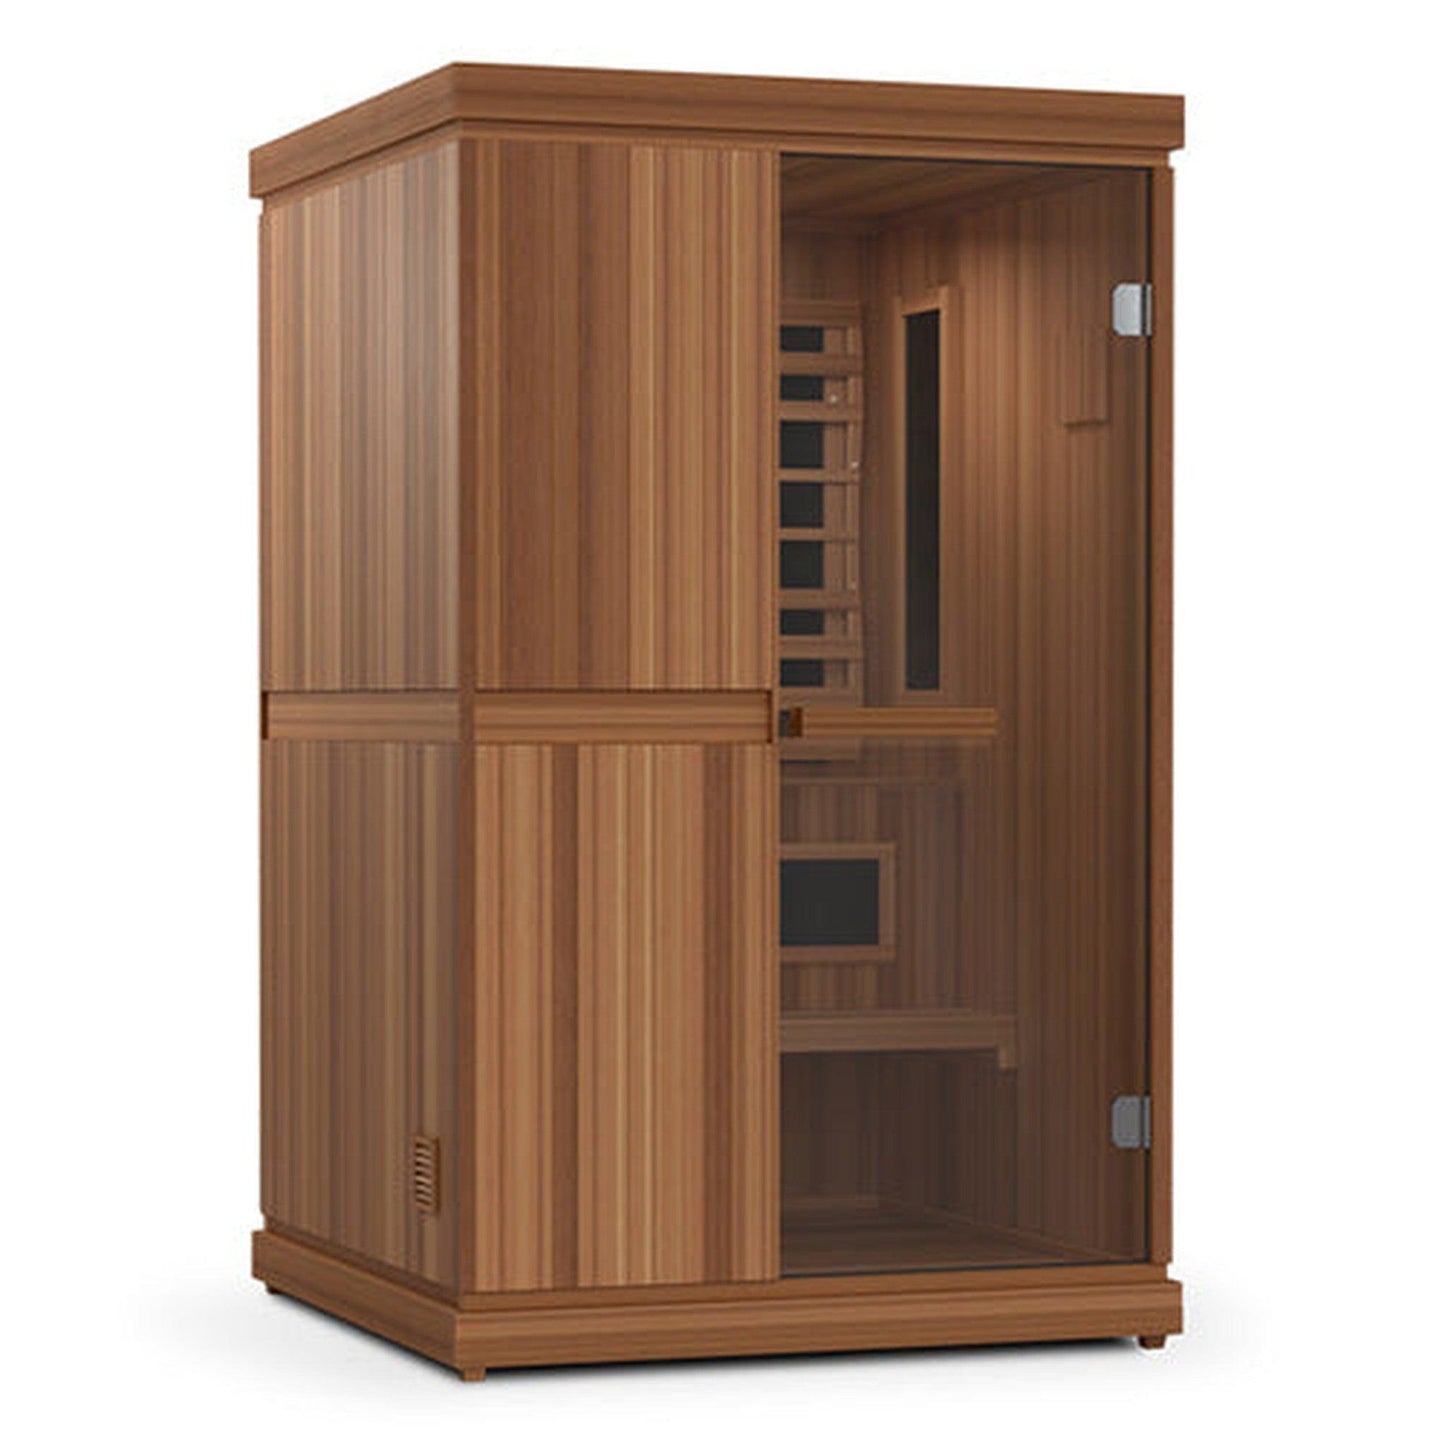 Finnmark Designs FD-4 Trinity 48" 2-Person Home Infrared & Steam Sauna Combo With Infrared & Traditional Heater